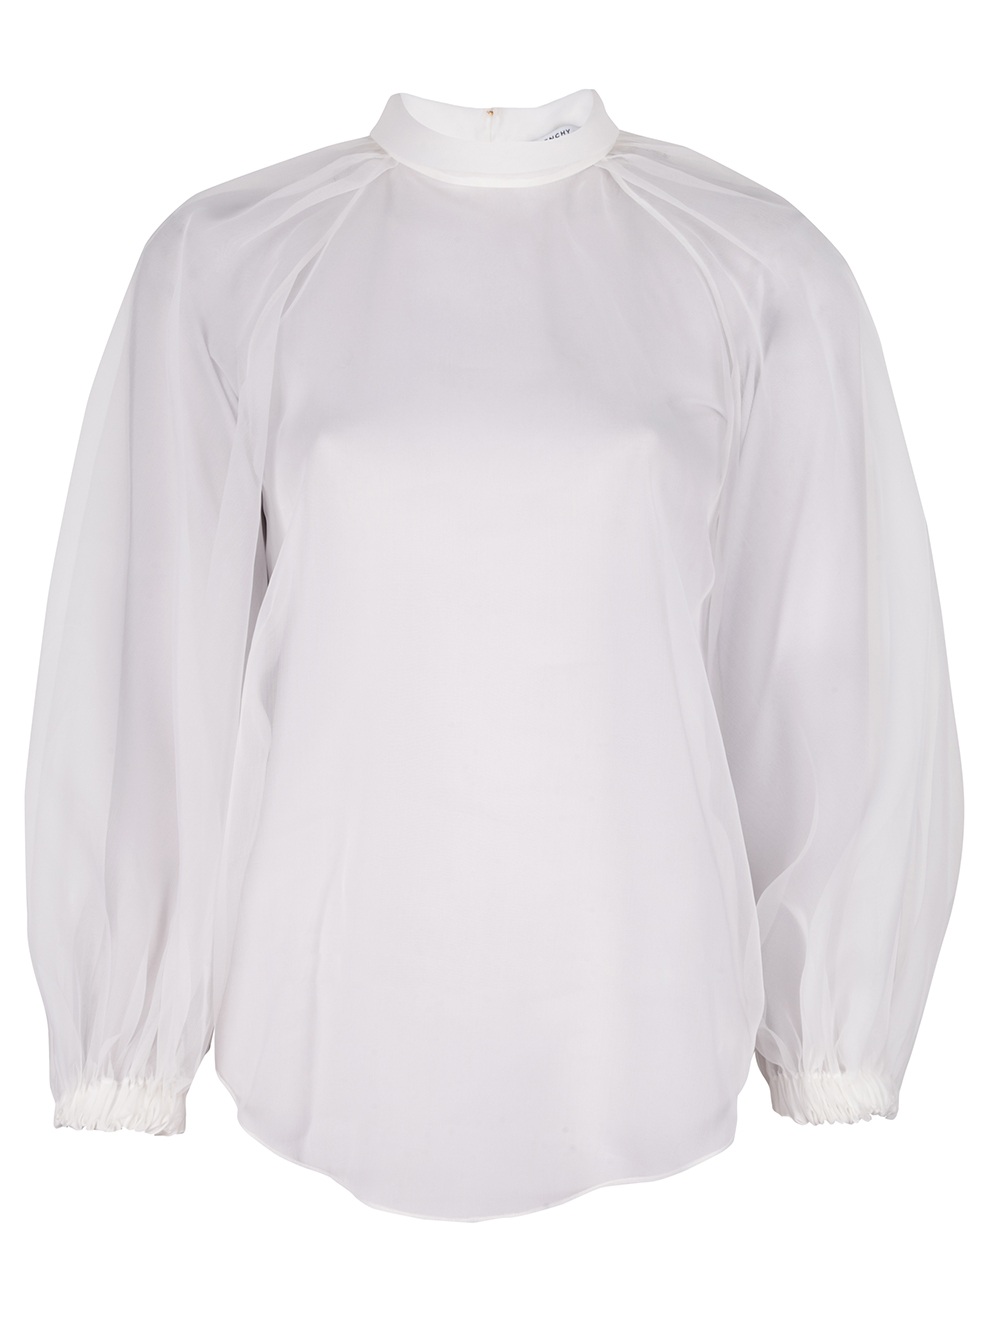 Givenchy Sheer Blouse in White - Lyst